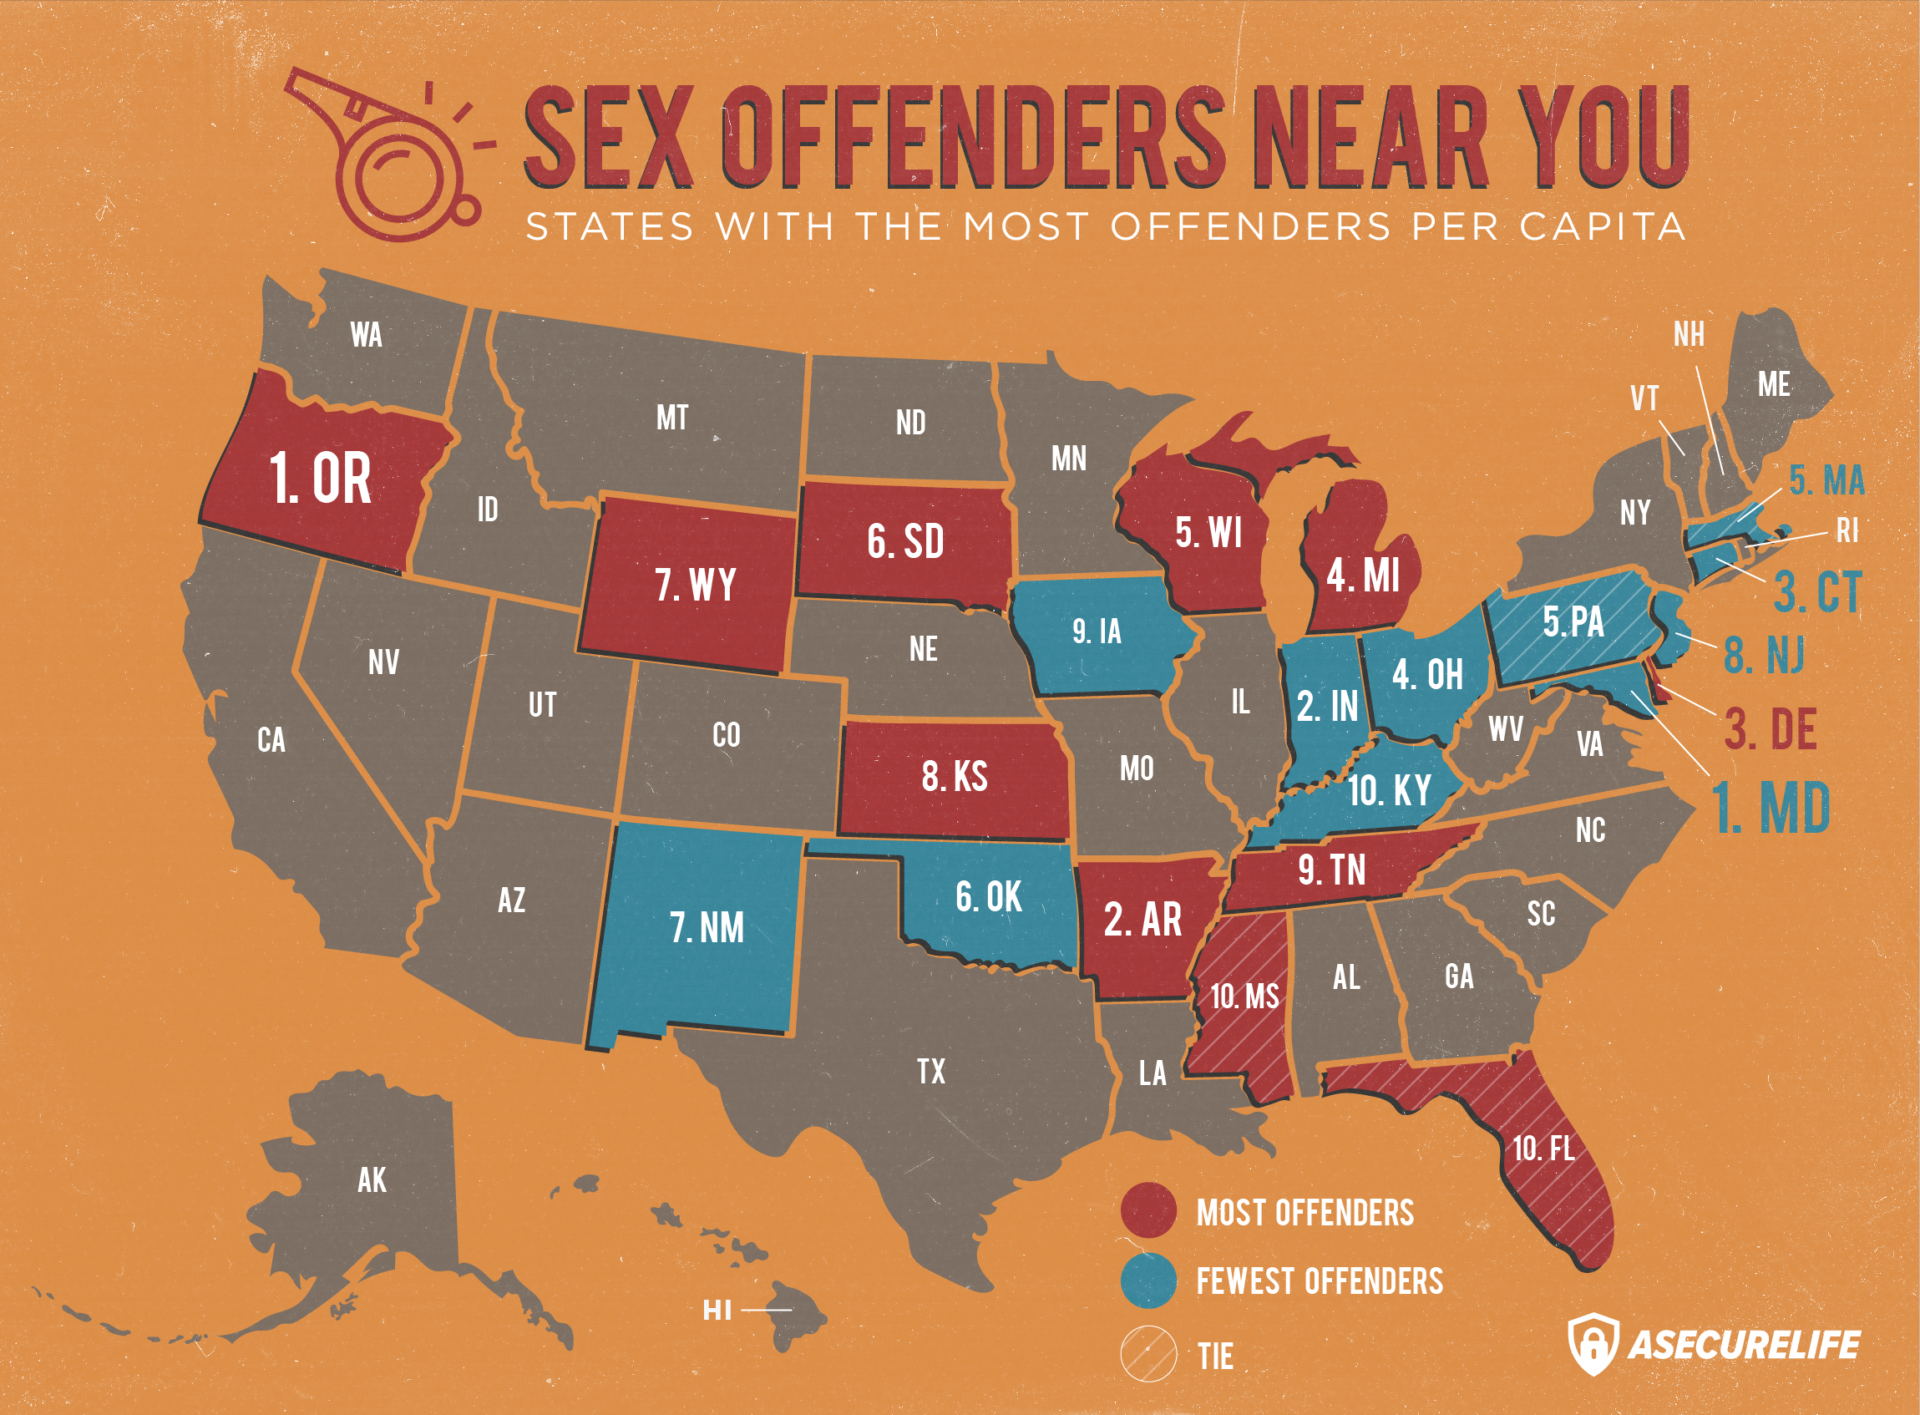 asl-sex-offenders-map-recolor-1920x1415.png